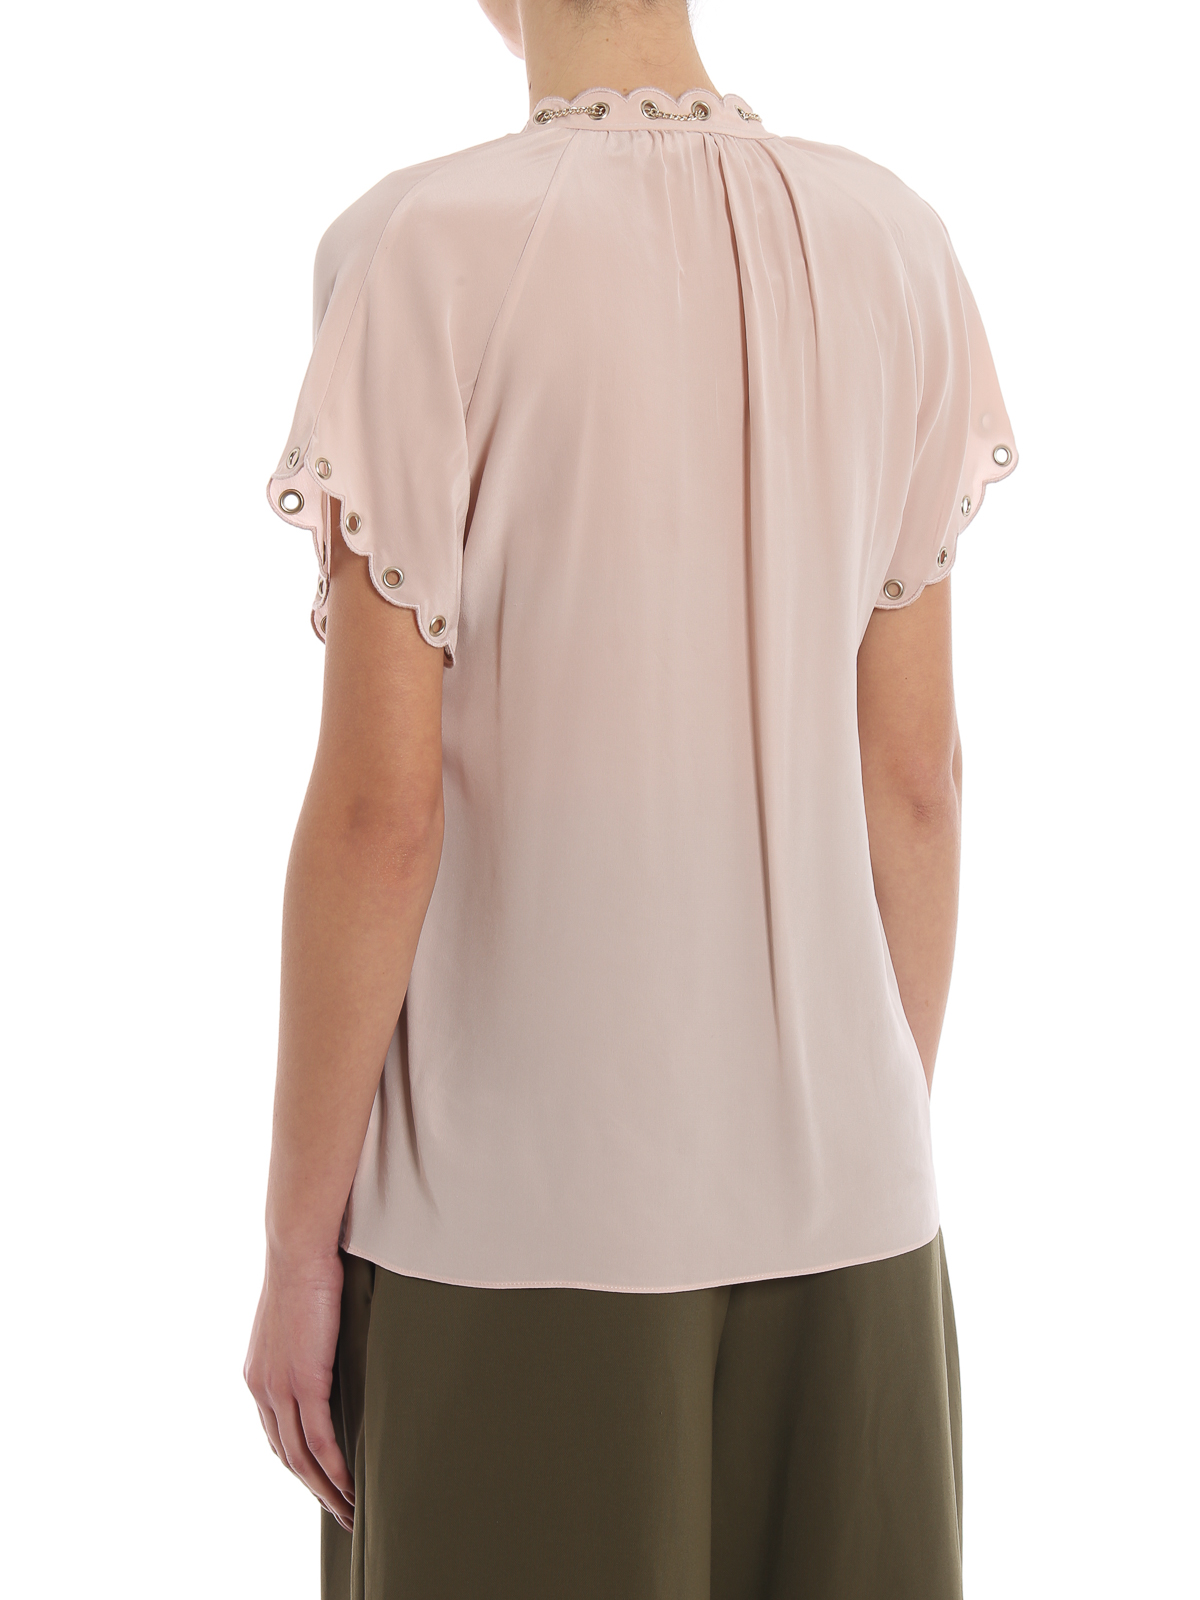 Shop Michael Kors Silk Crepe Blouse With Chain And Eyelets In Light Pink